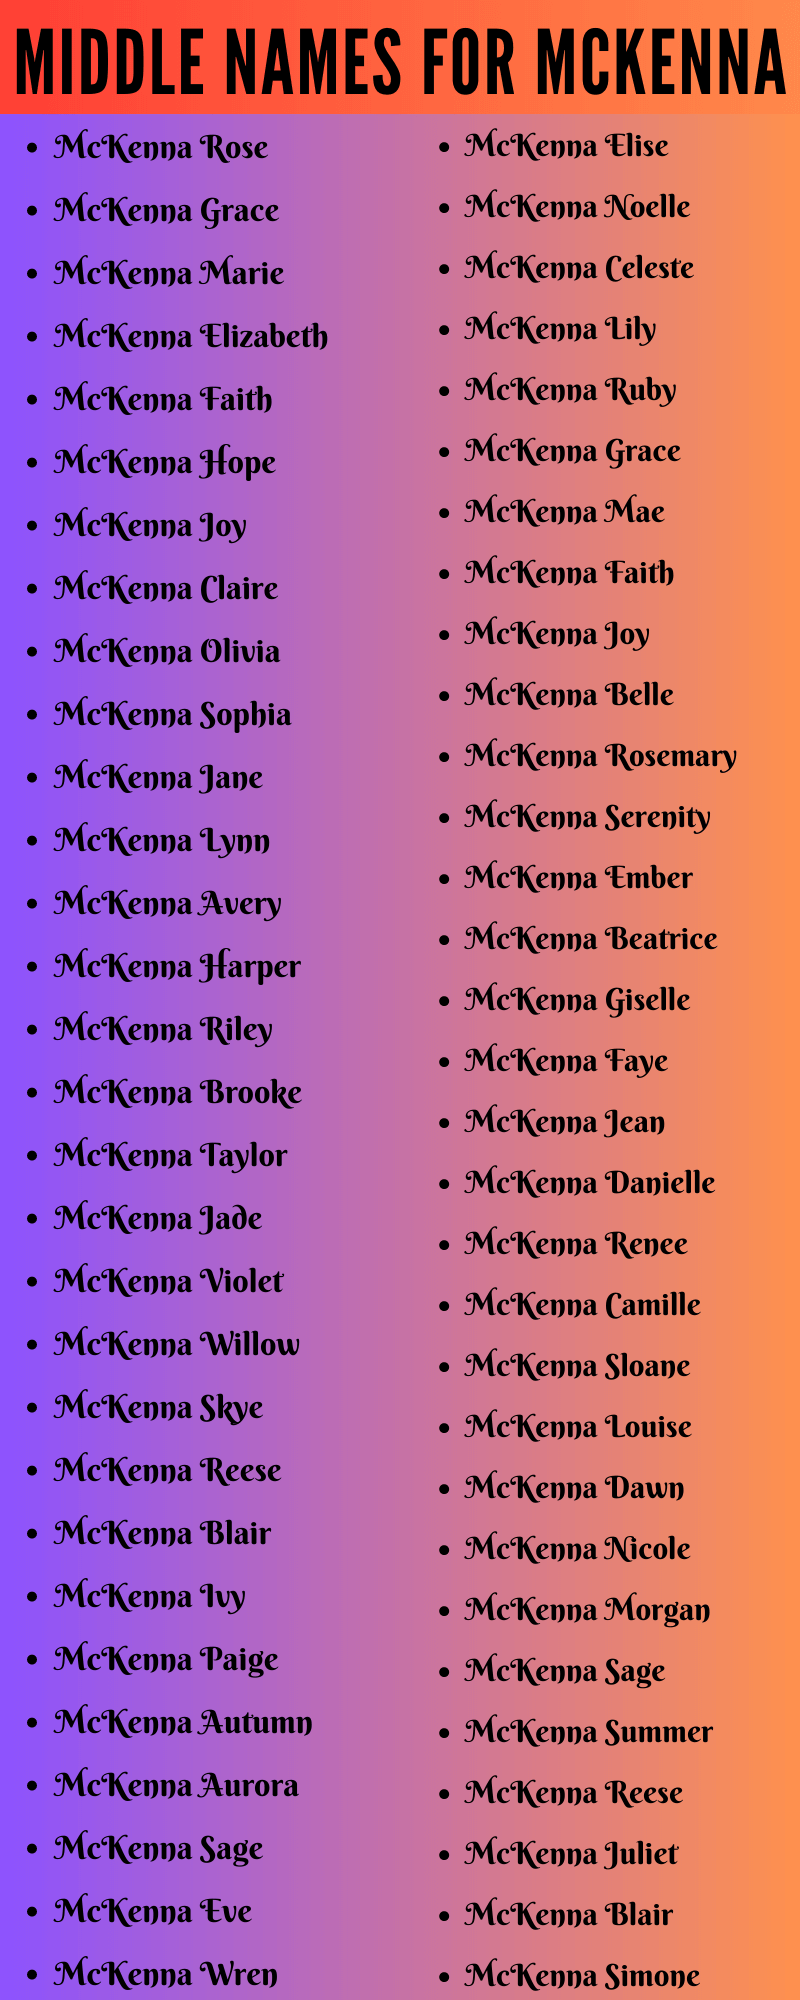  400 Amazing Middle Names For Mckenna